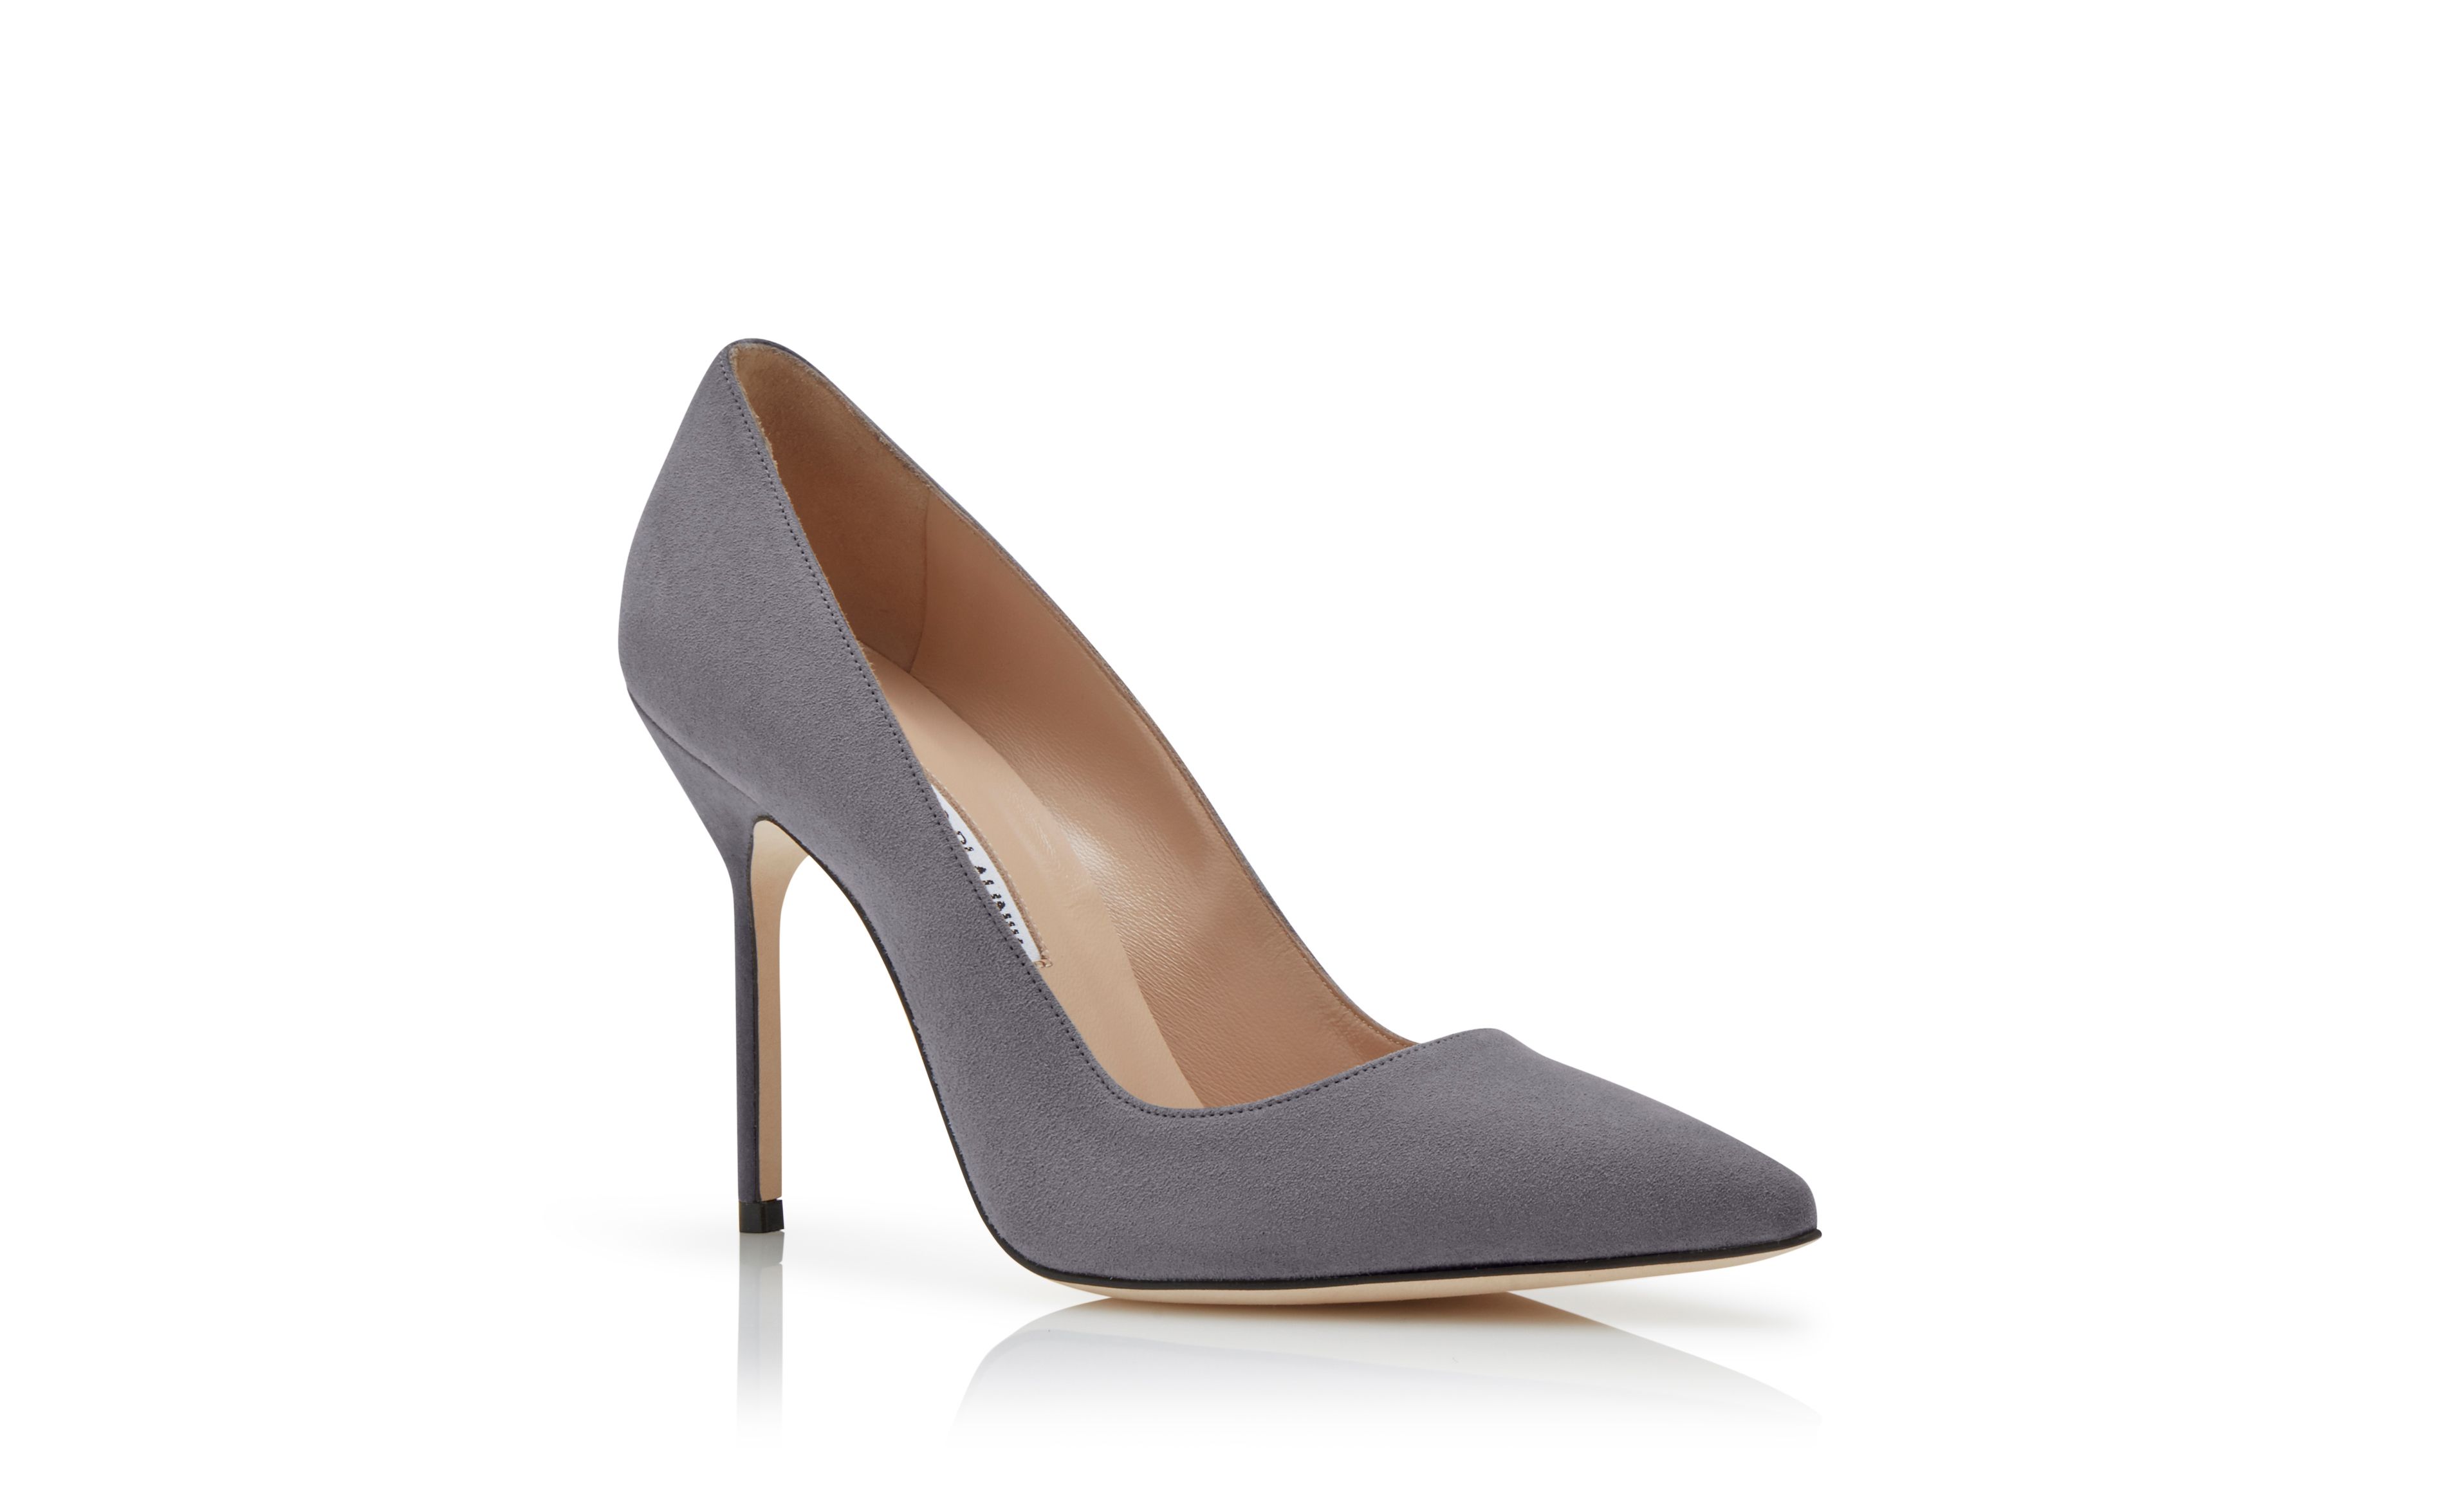 Designer Grey Suede Pointed Toe Pumps - Image Upsell